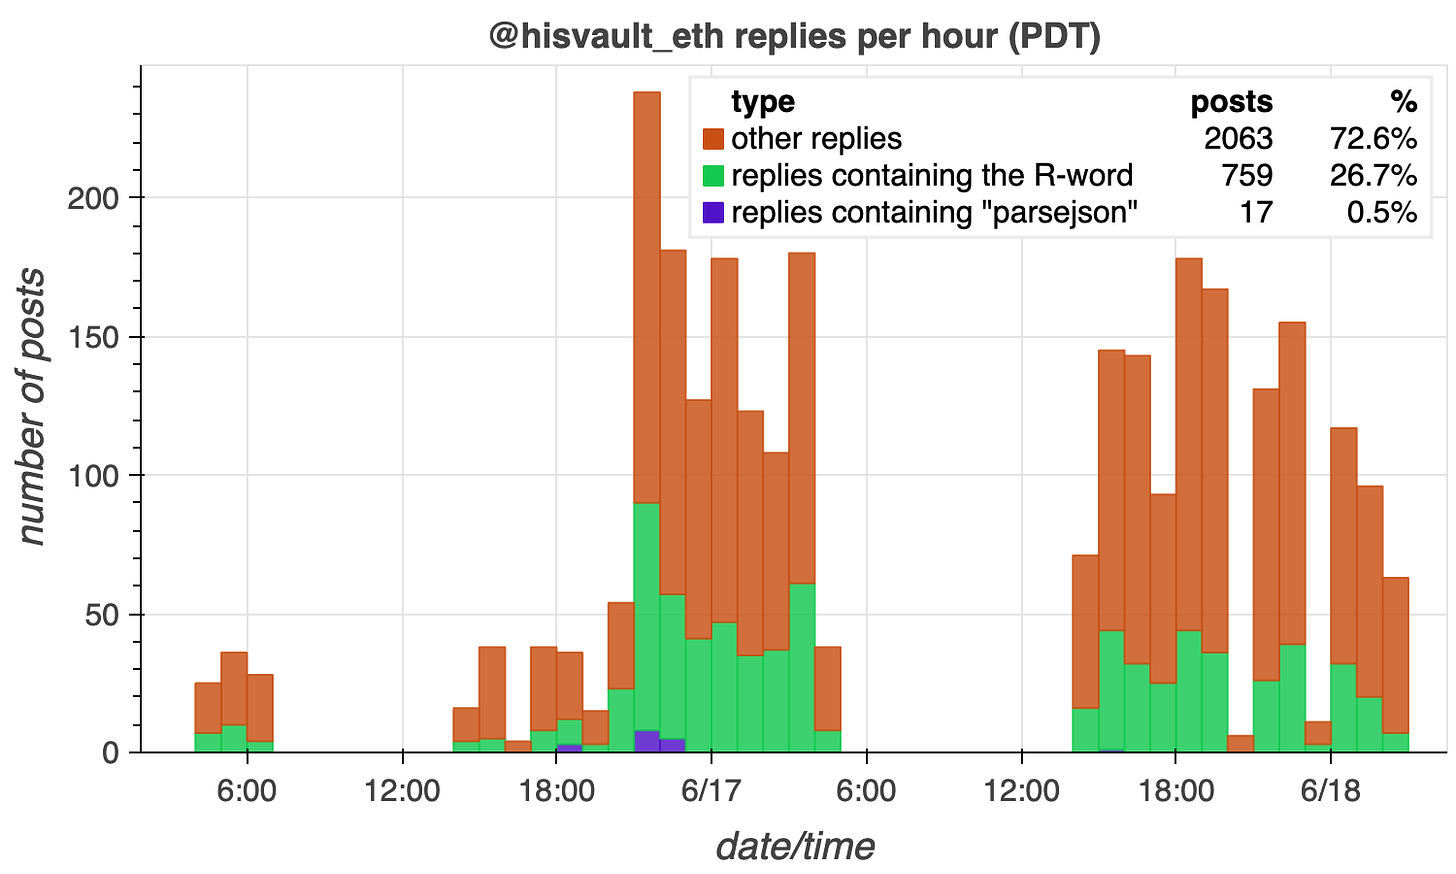 hourly volume barchart for replies sent by @hisvault_eth